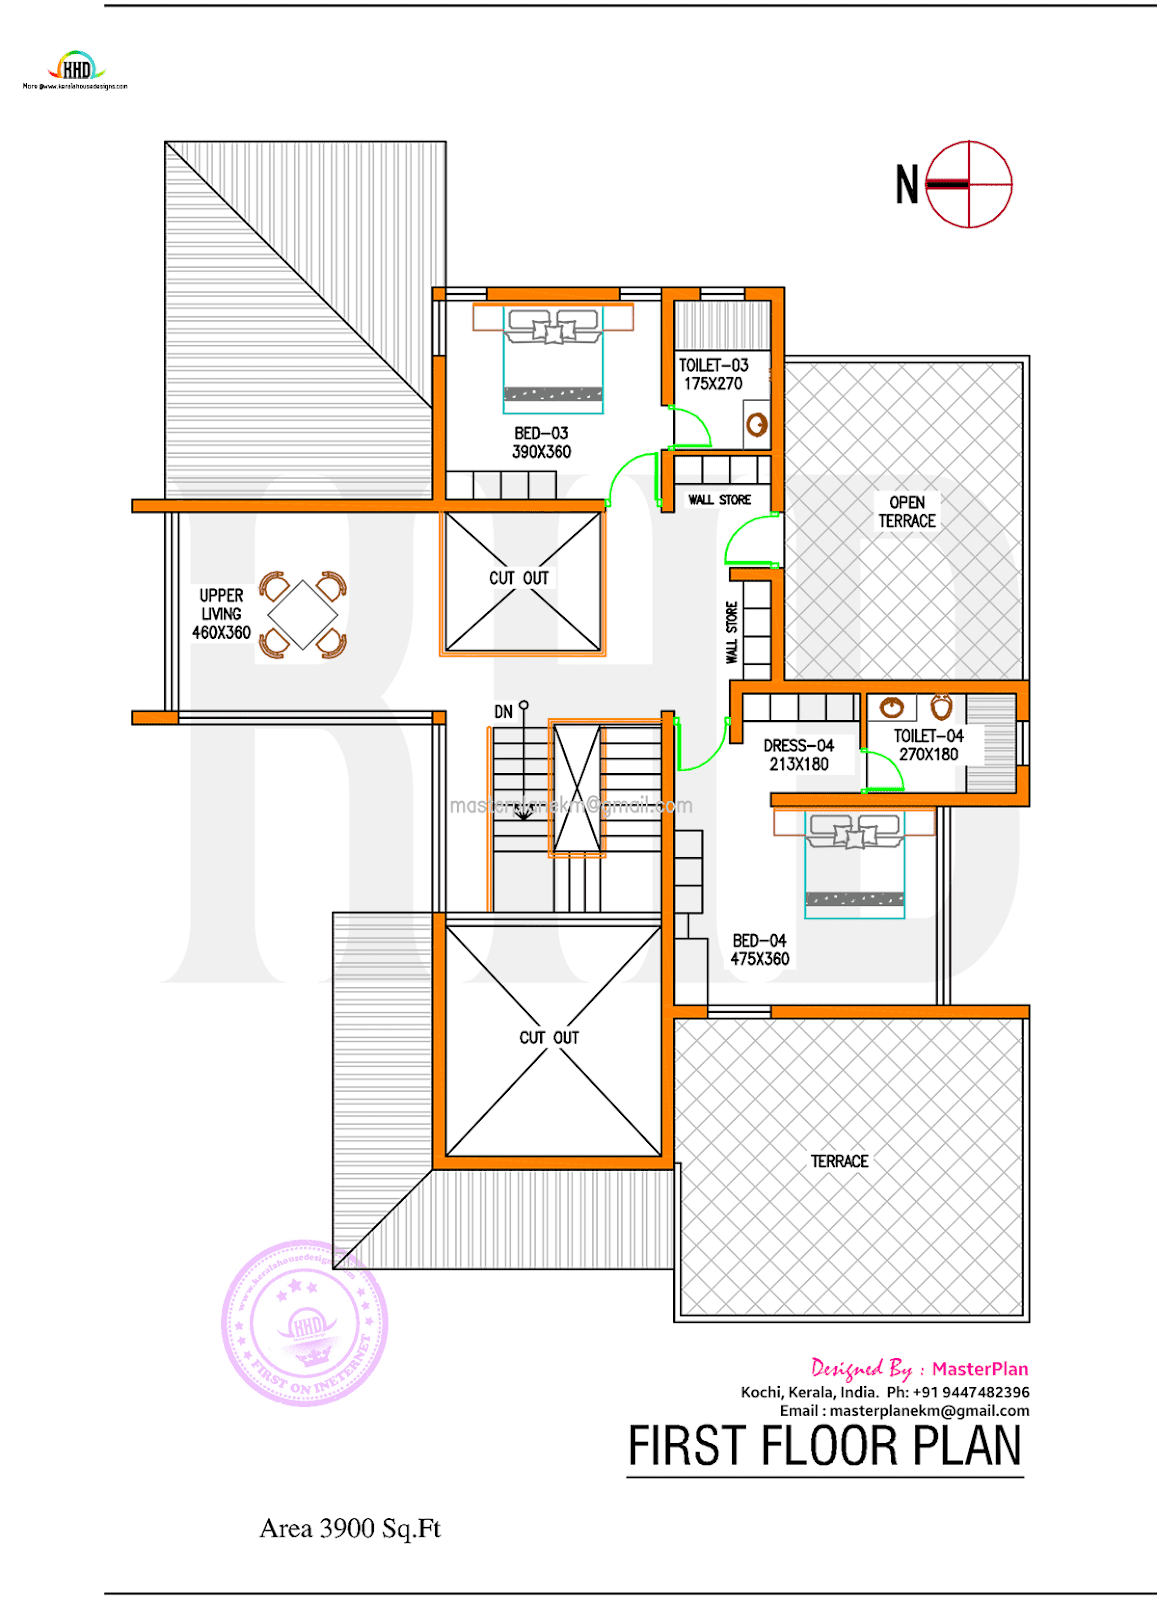 First Floor Plan Drawing of the 4-Bedroom Slanting Roof Mix House